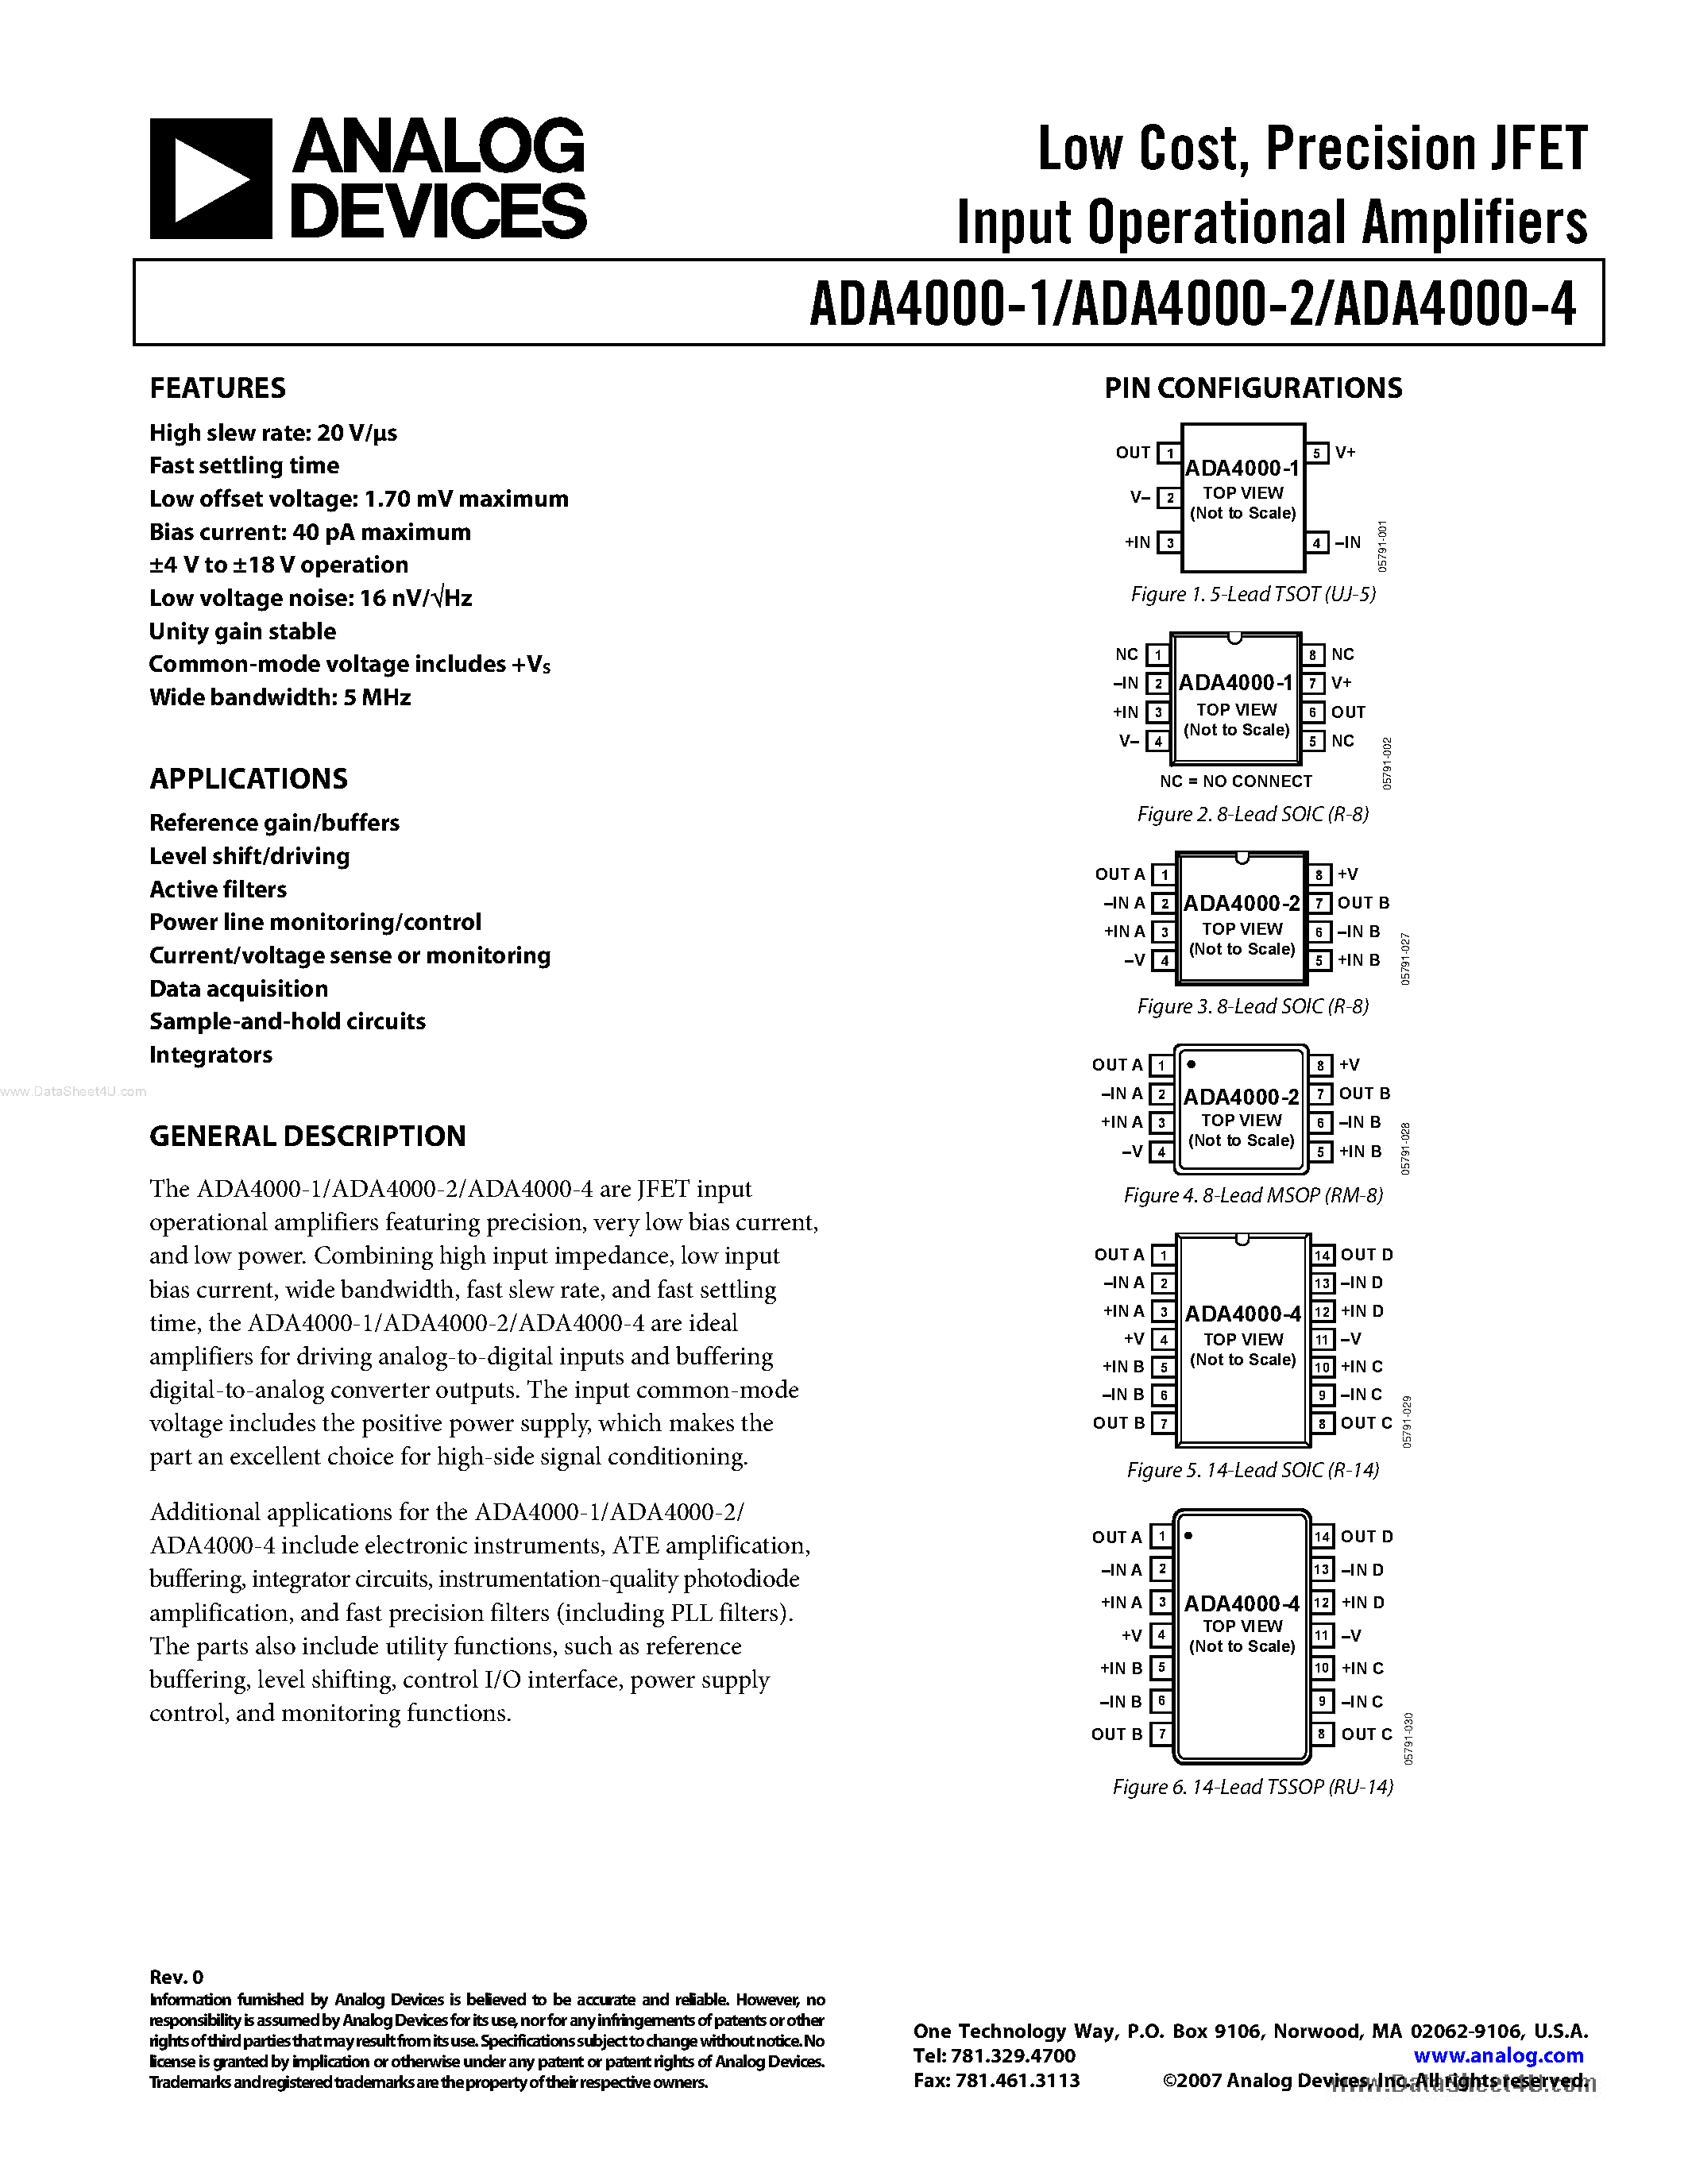 Datasheet ADA4000-1 - (ADA4000-1/-2/-4) Low Cost Precision JFET Input Operational Amplifiers page 1